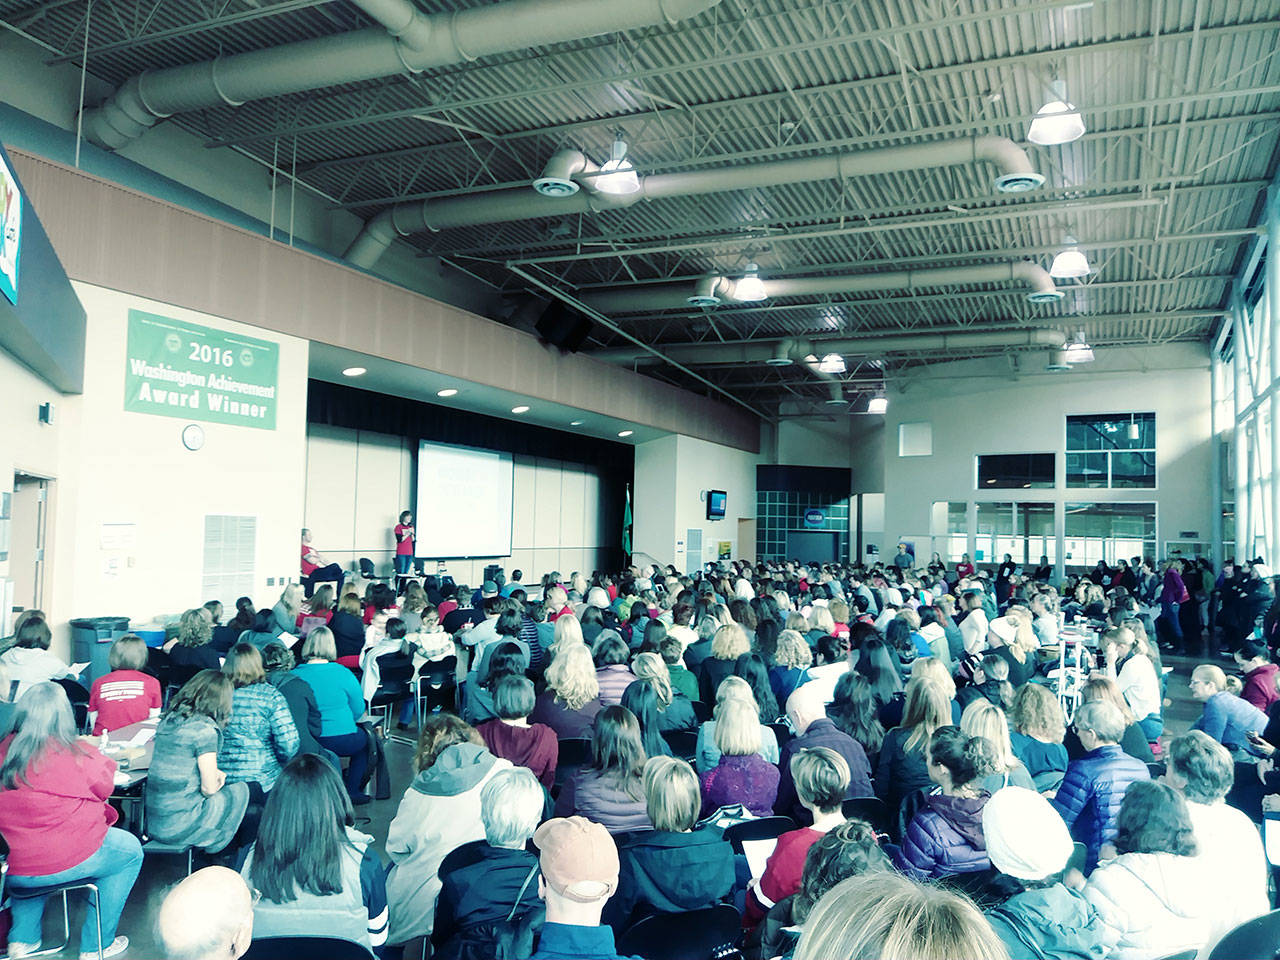 Hundreds of people gathered at a Moms Demand Action meeting for gun control at Kirkland Middle School on Feb. 25. Aaron Kunkler/Redmond Reporter